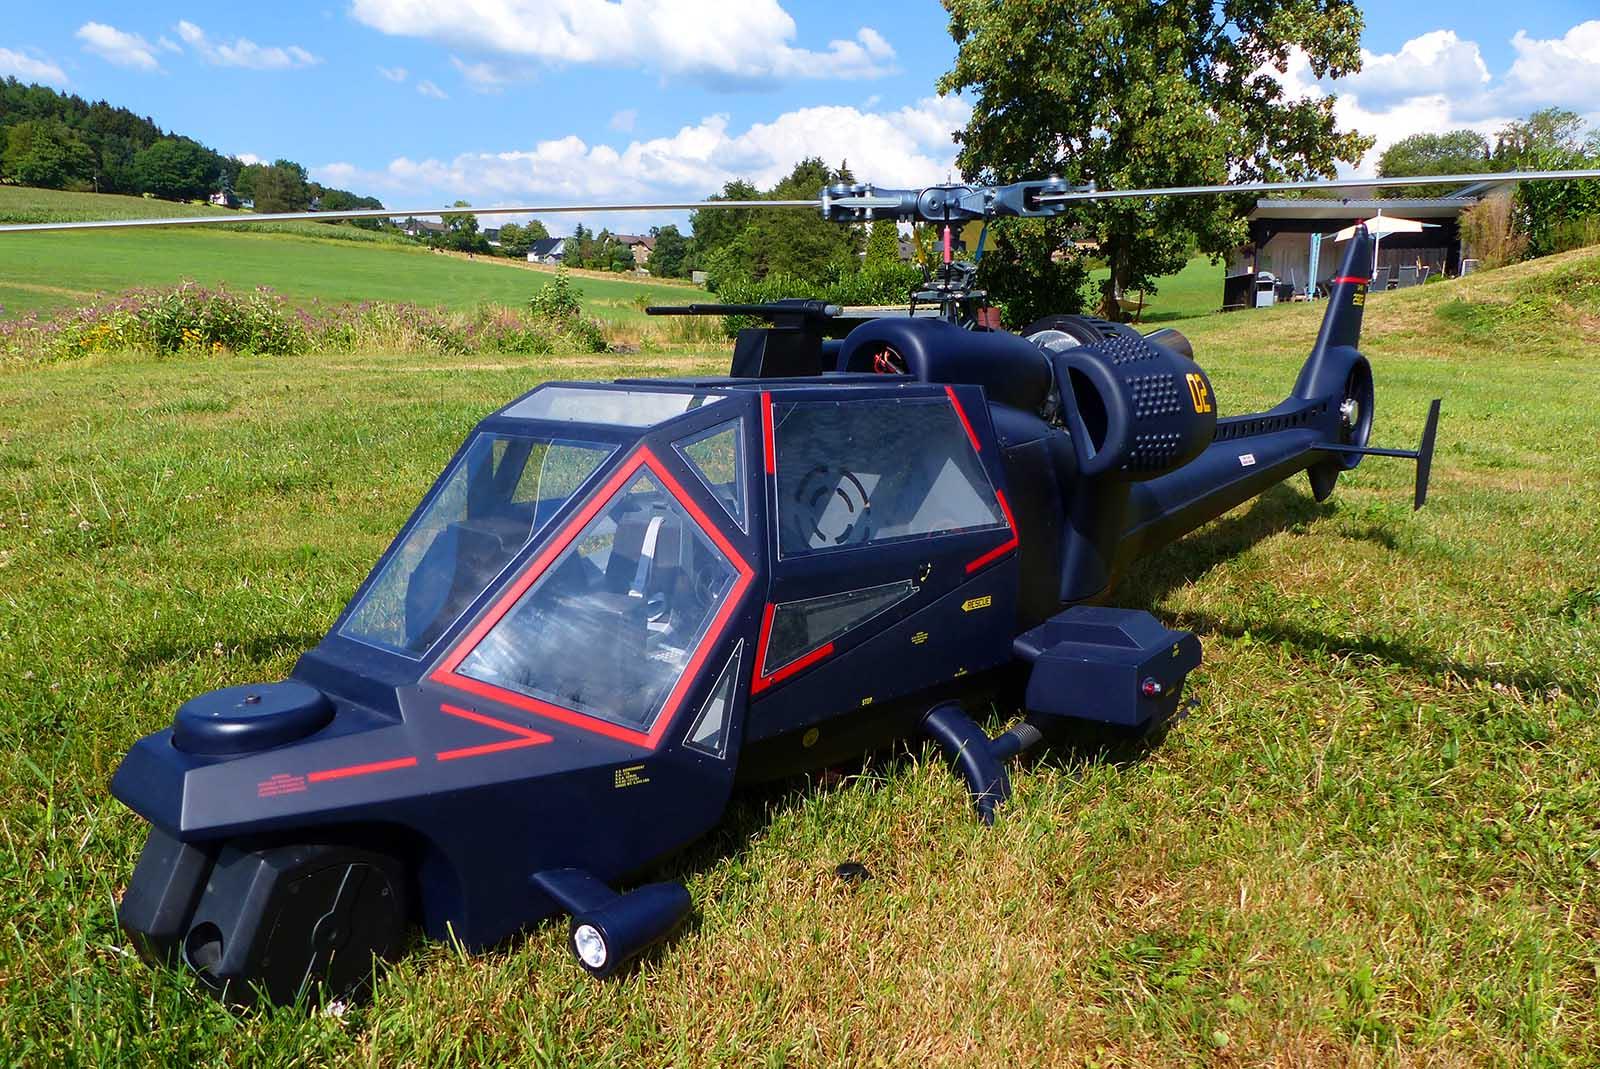 Blue Thunder Rc Helicopter For Sale: Top-notch Performance and Availability of Blue Thunder RC Helicopter for Purchase